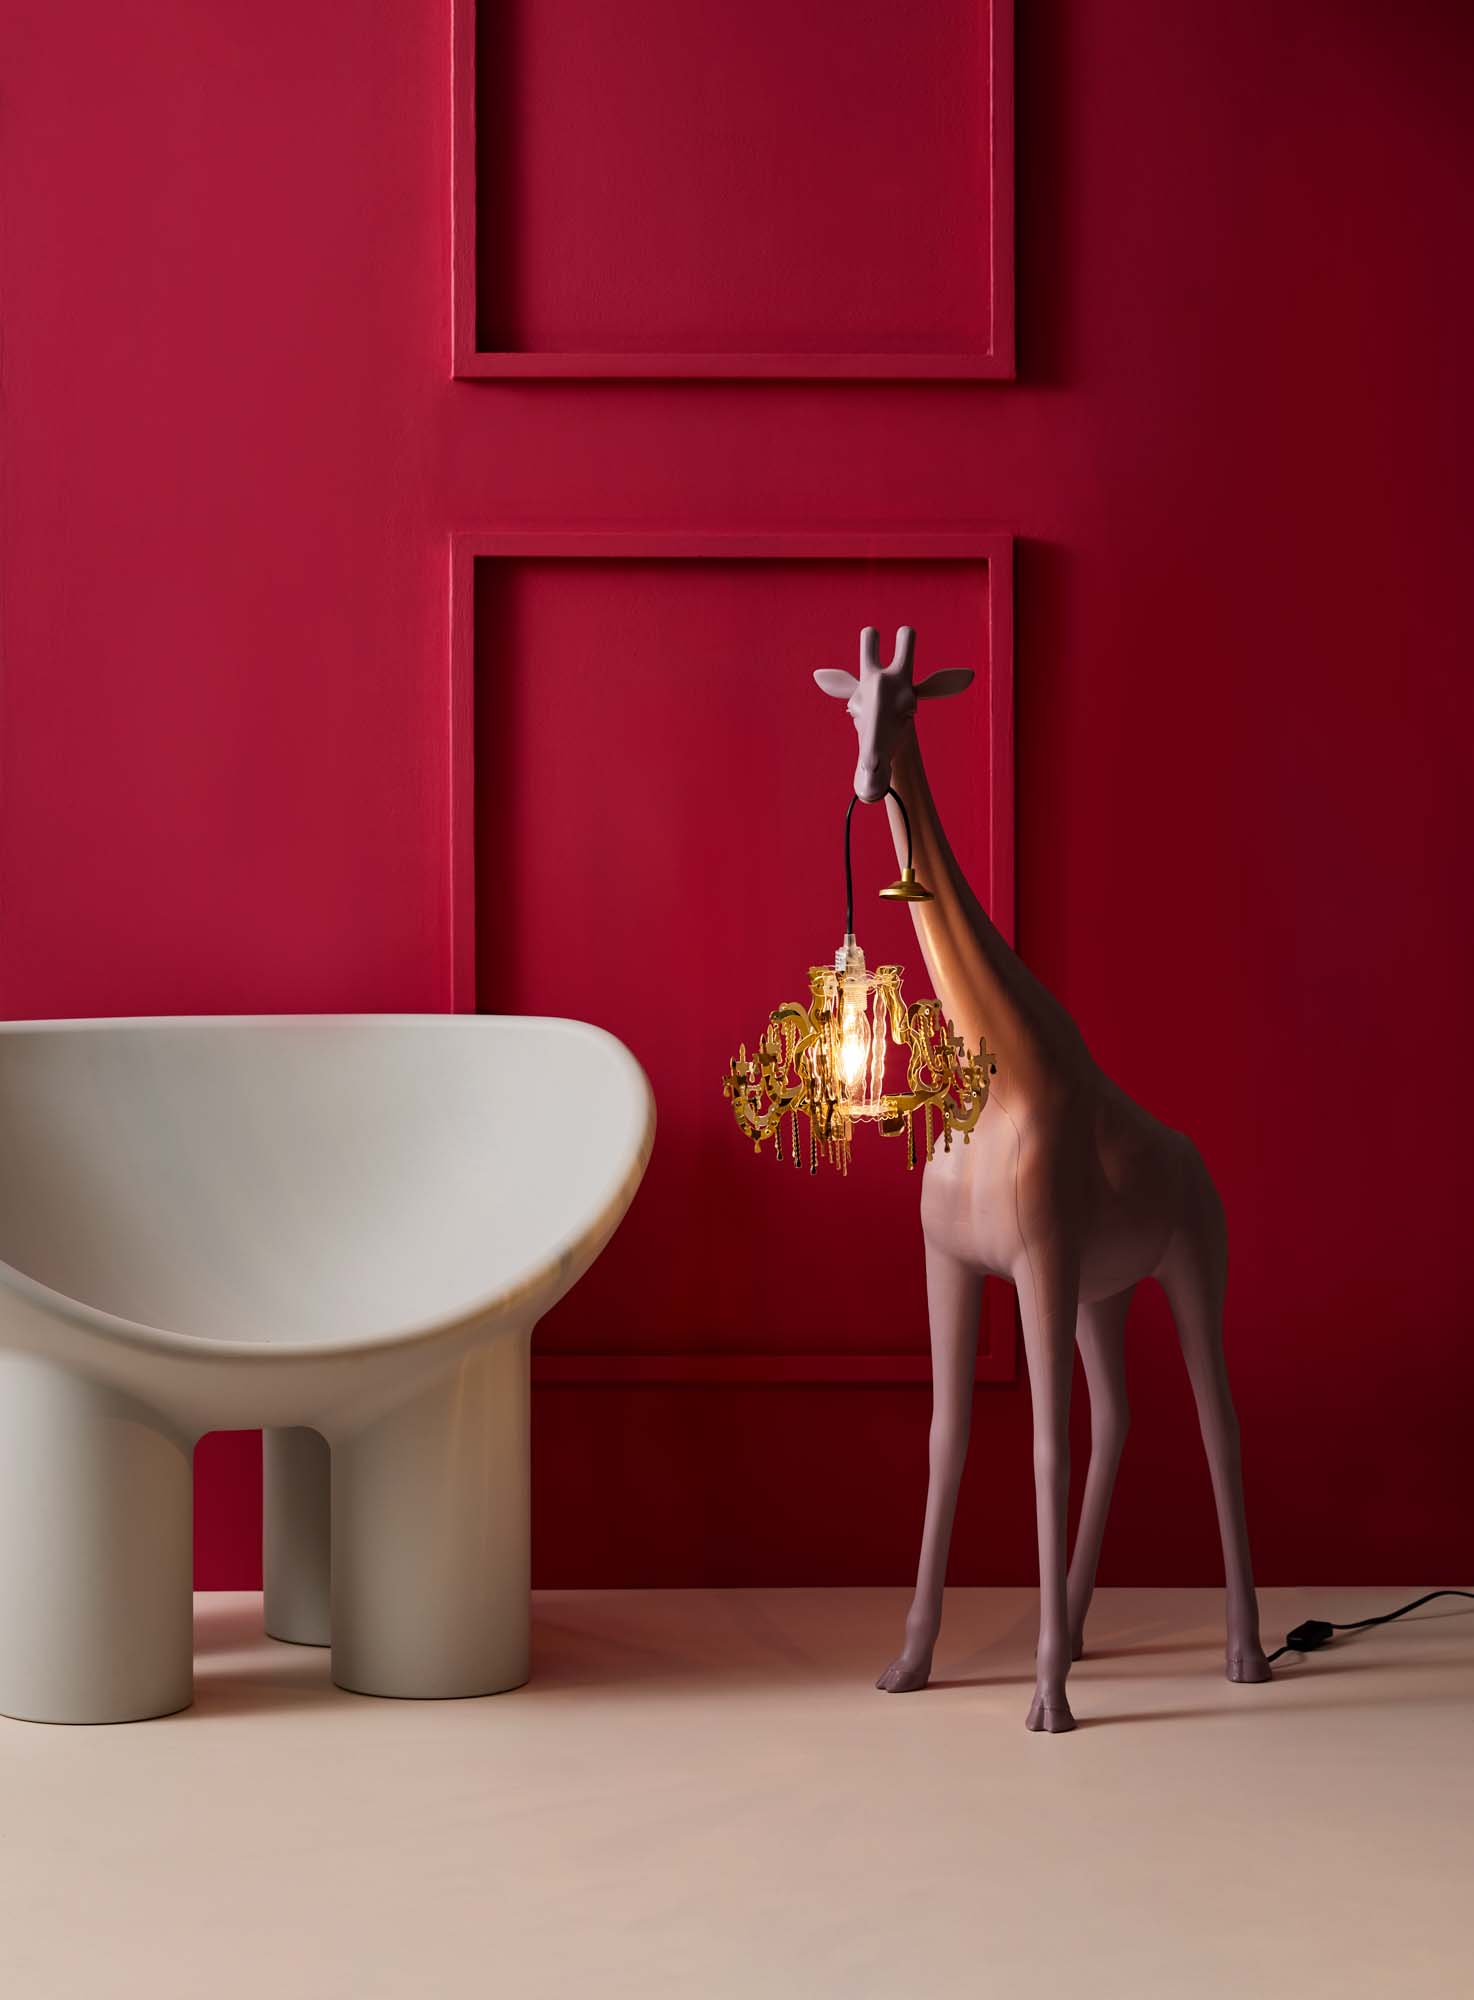 Image with a raspberry red wall, white chair and a giraffe statue